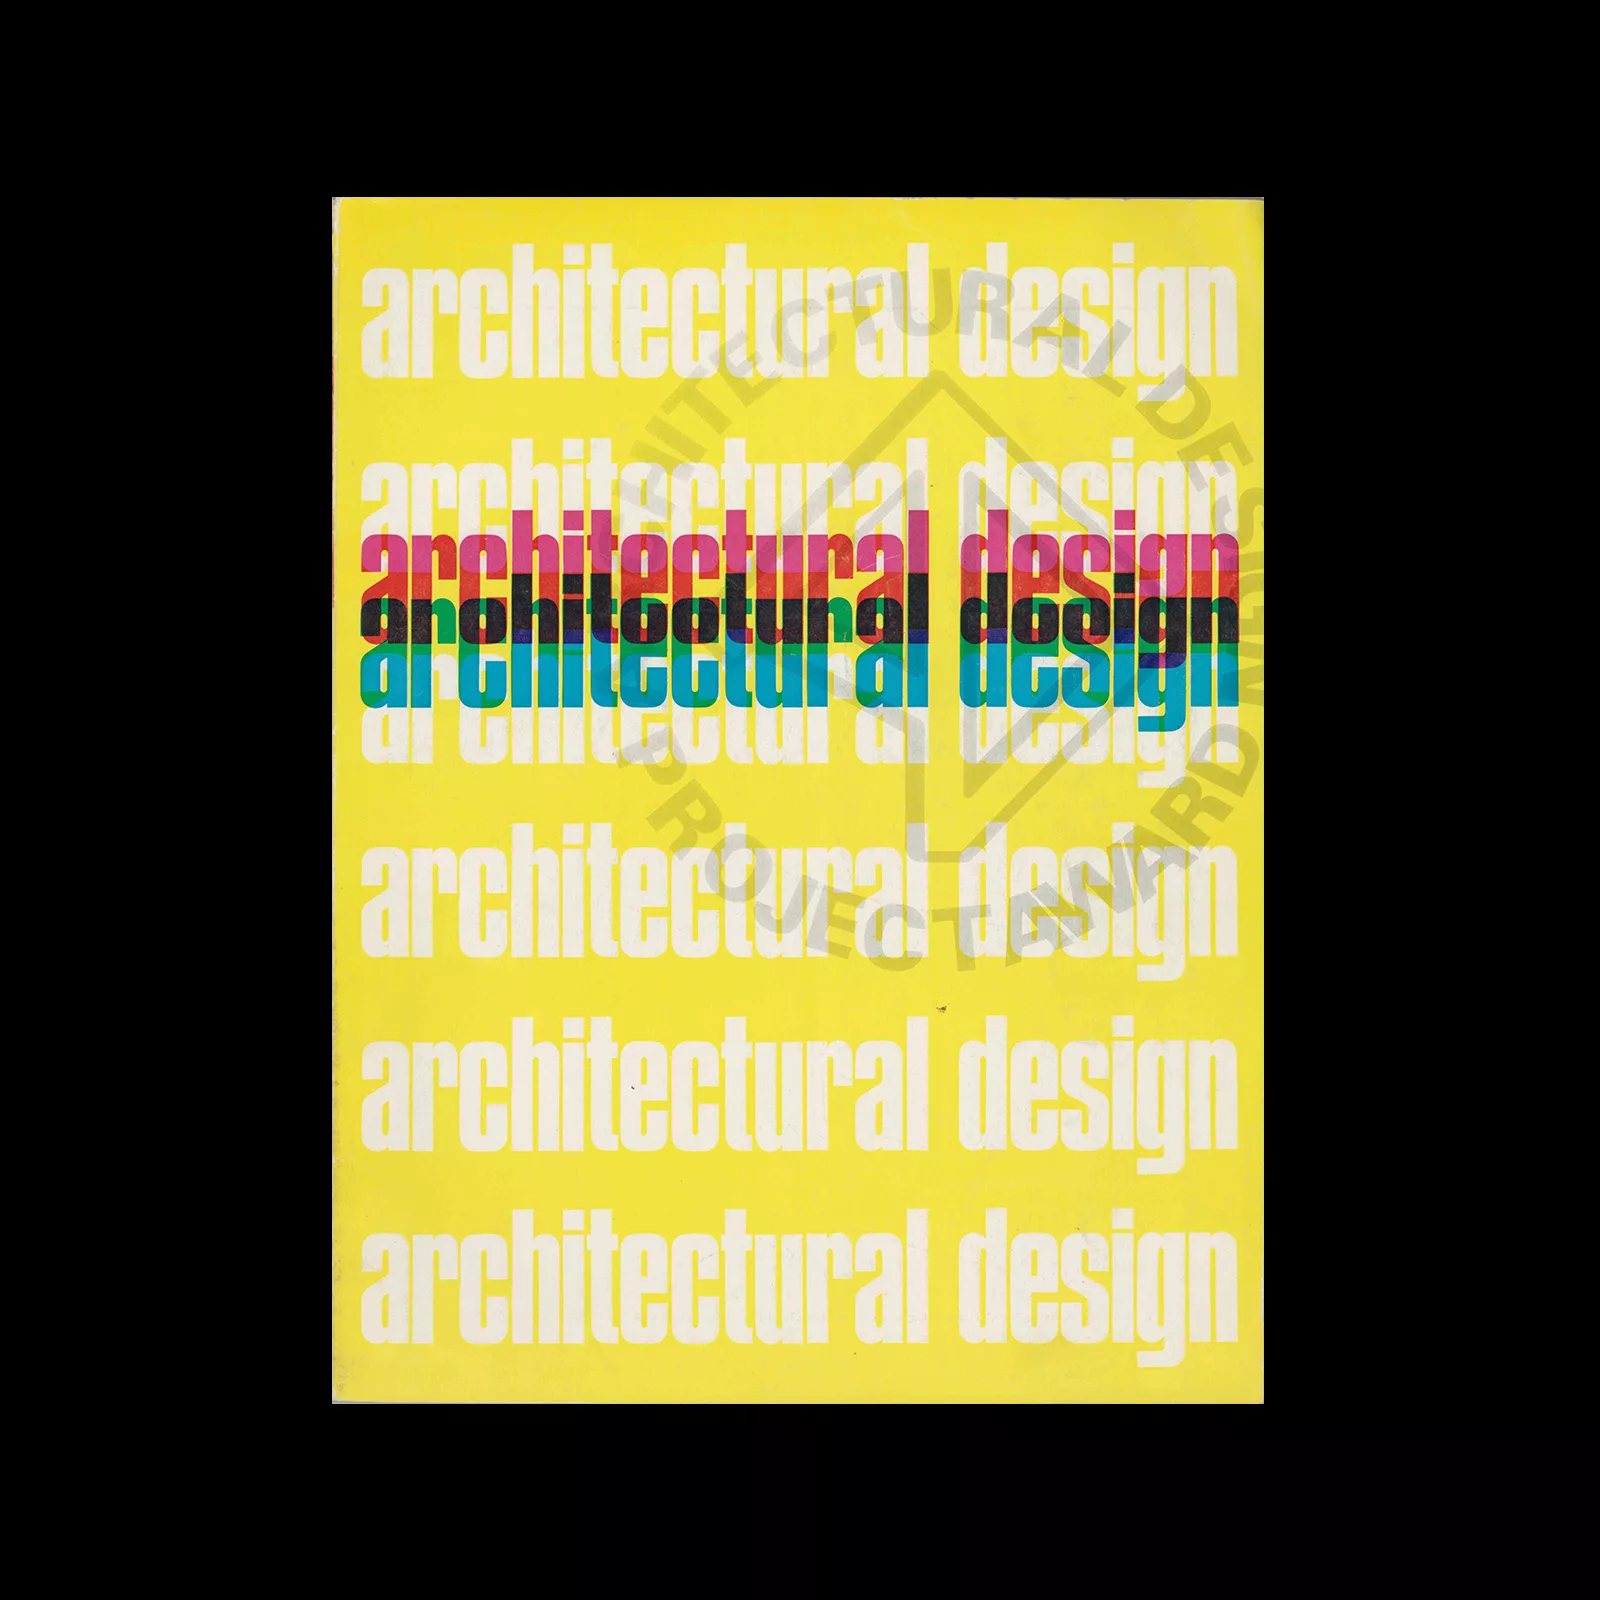 Architectural Design, January 1968